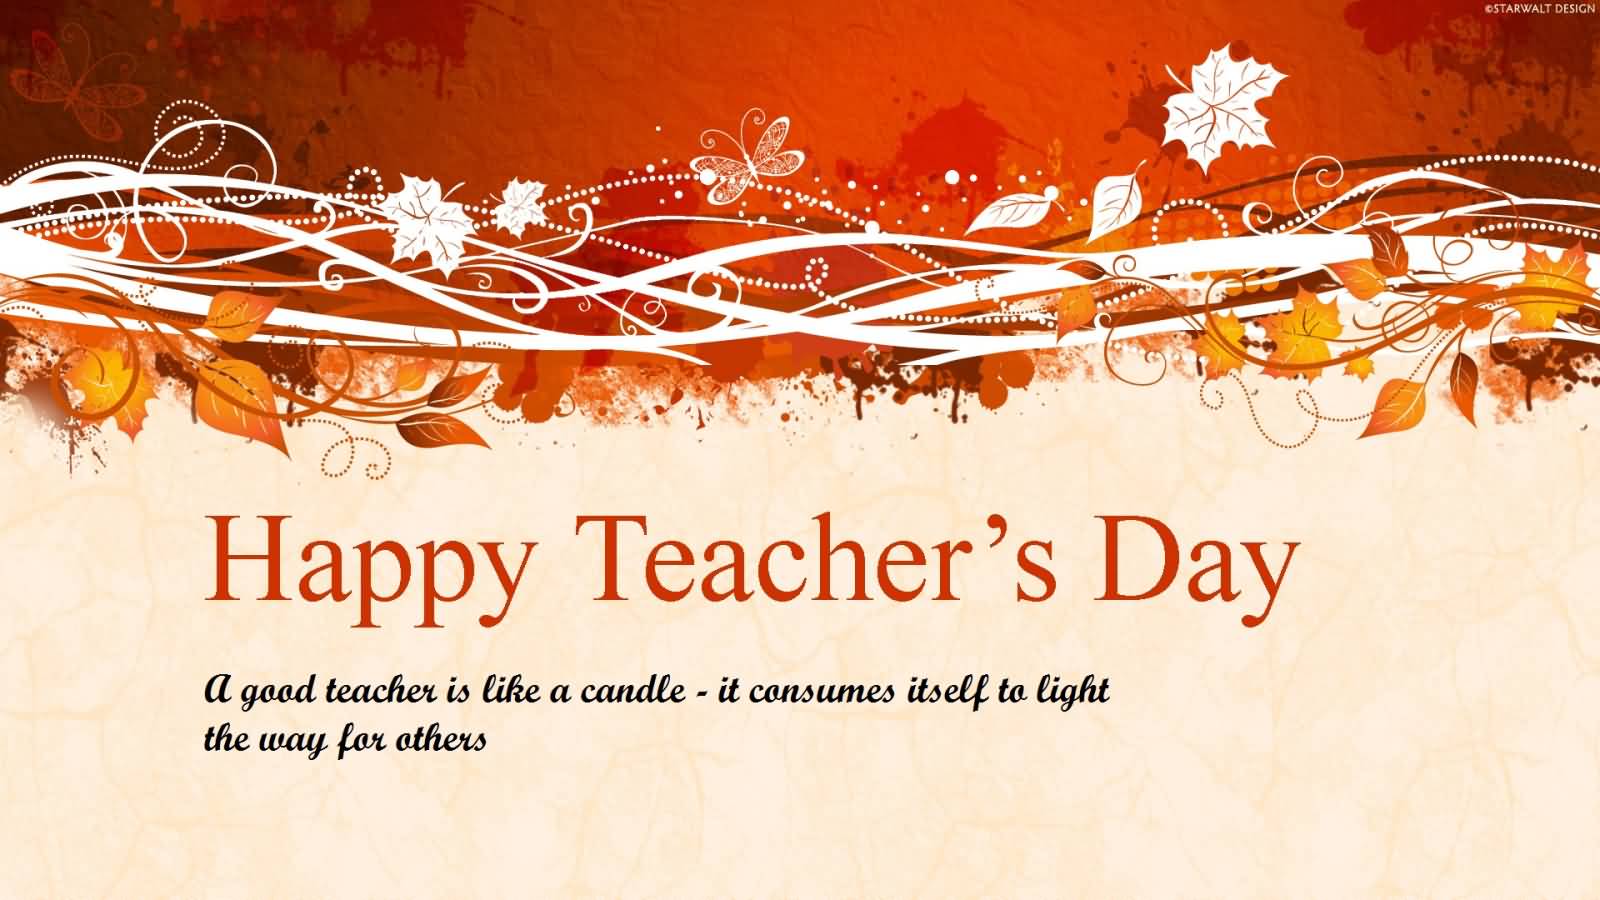 2018} Happy Teachers Day Image, Picture, Photo and Wallpaper